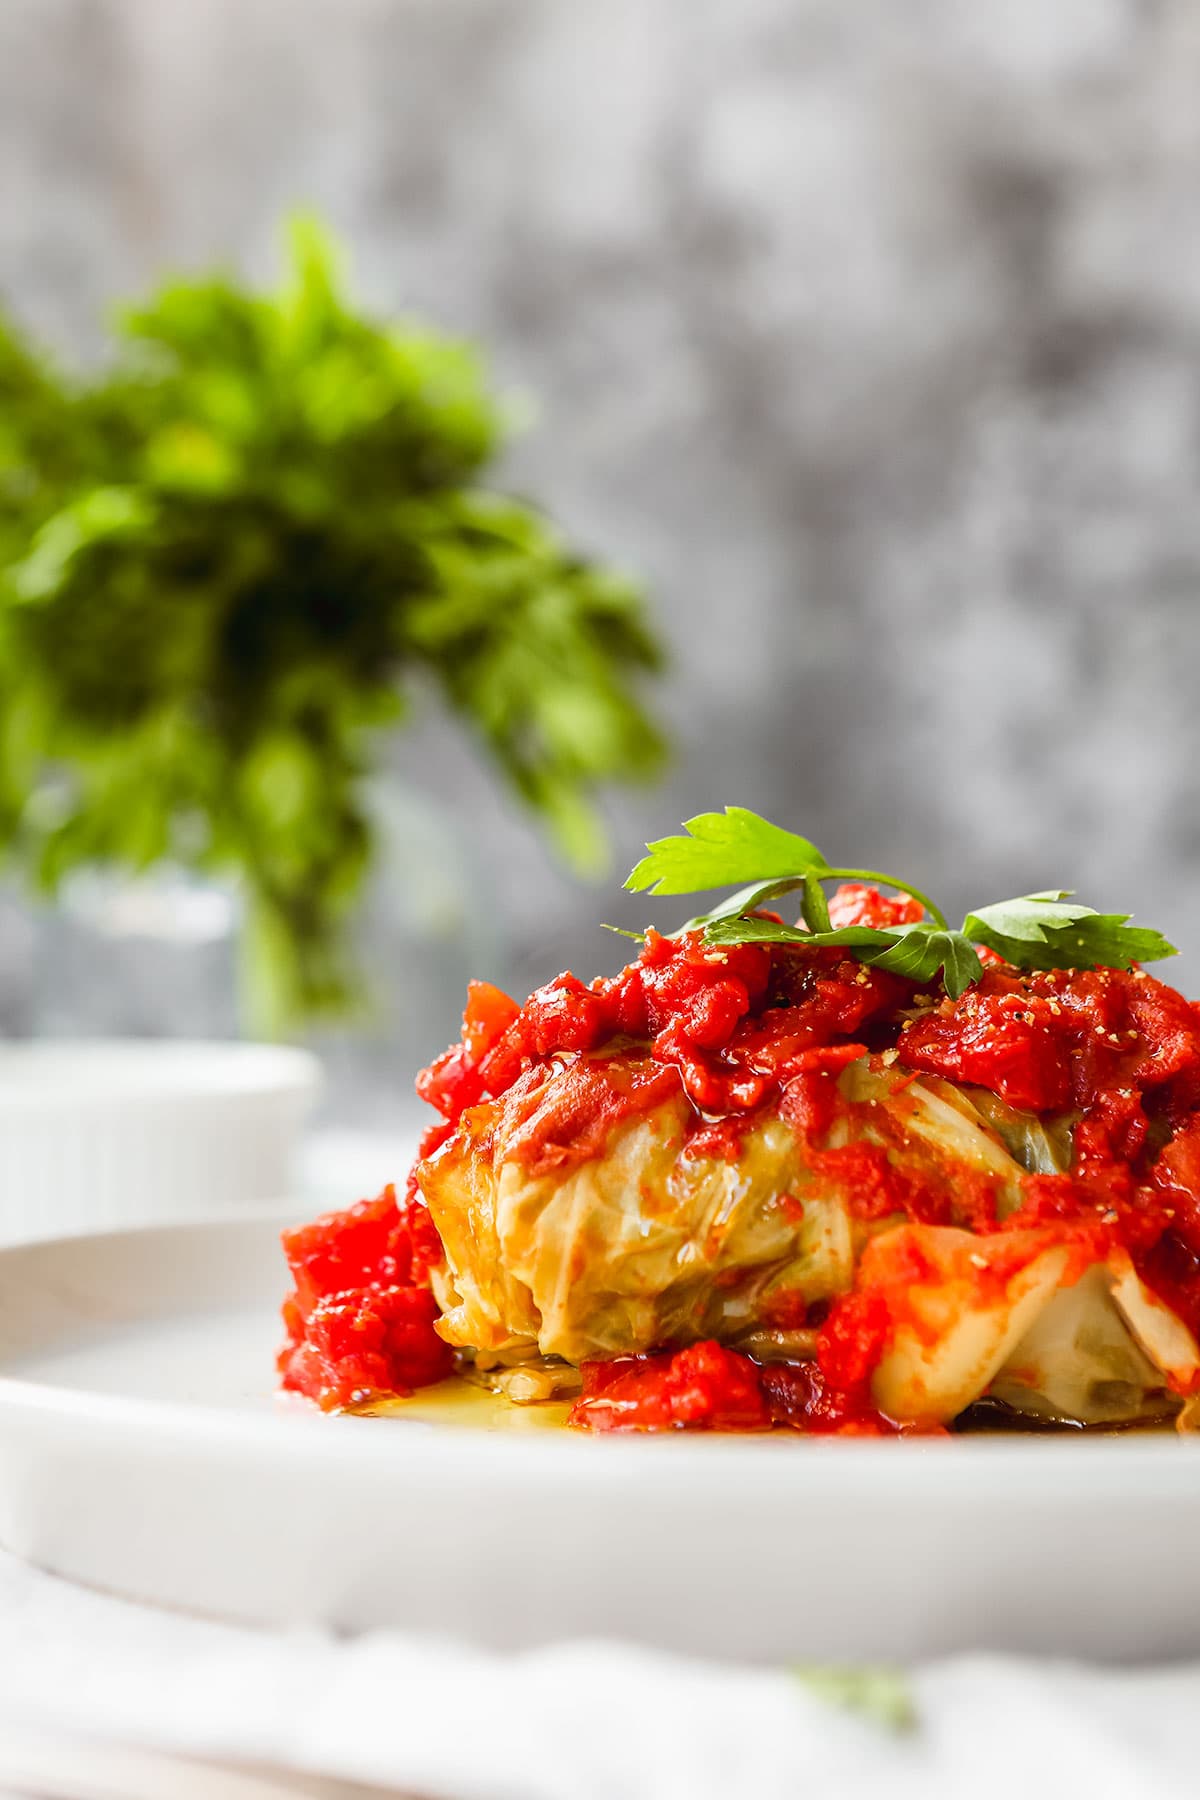 Beef and Rice Stuffed Cabbage Rolls cabbage leaf roll on plate with tomato sauce and parsley garnish